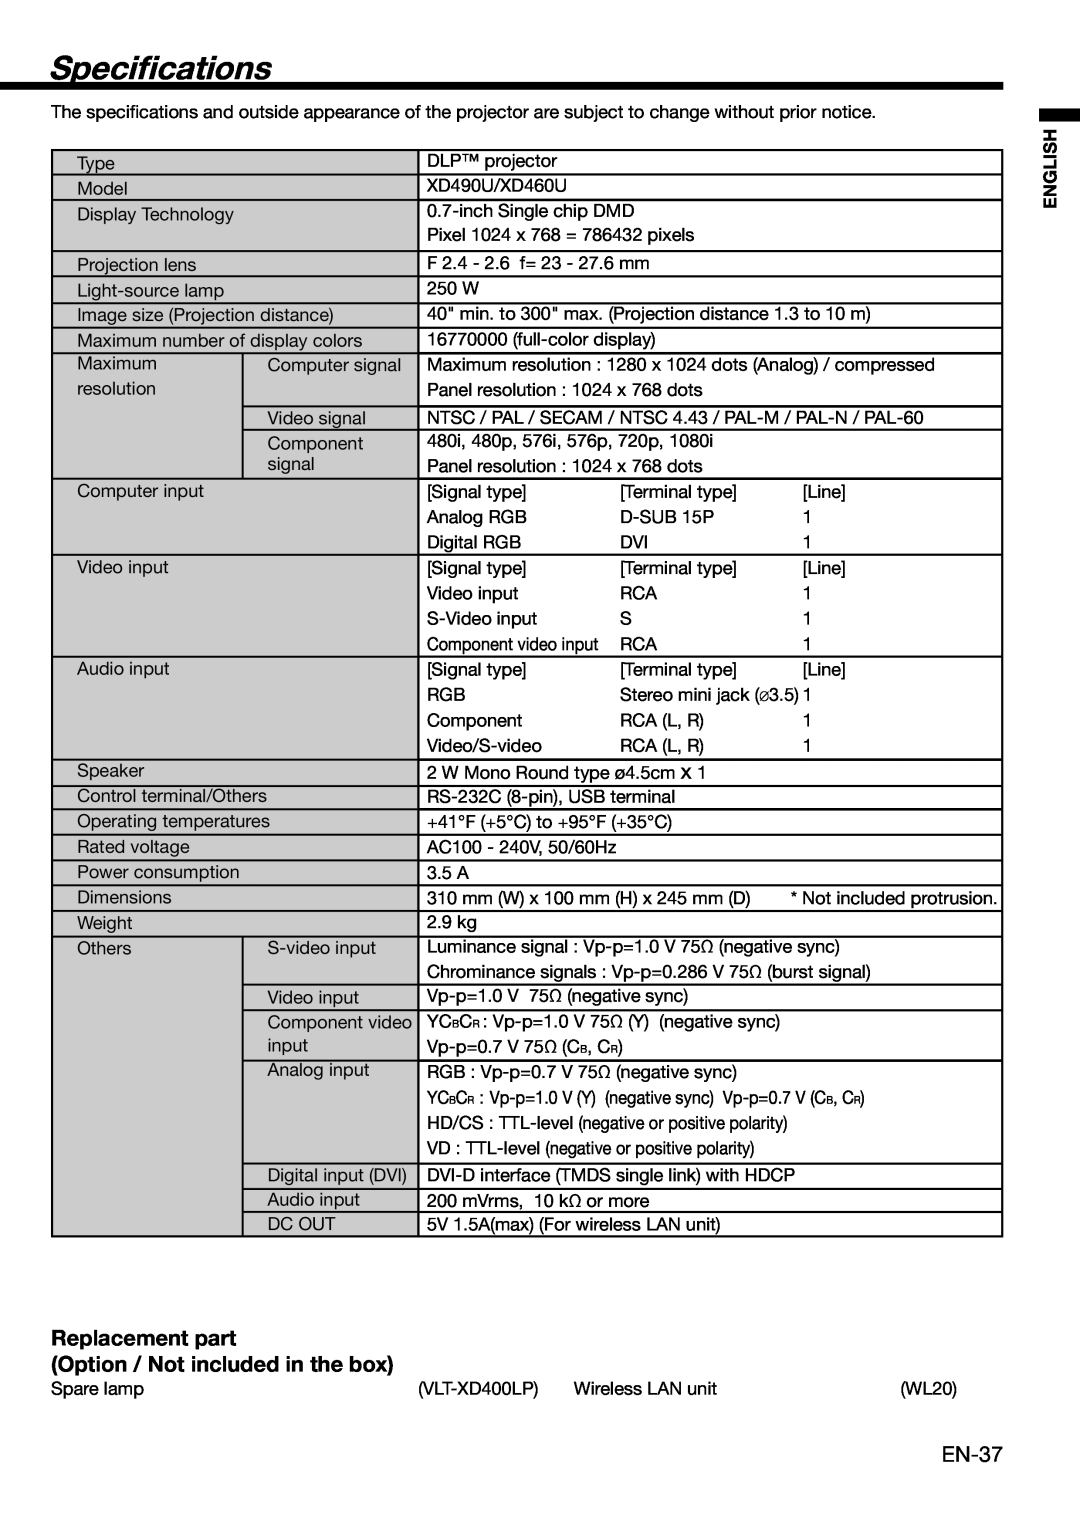 Mitsubishi Electronics XD460U user manual Speciﬁcations, Replacement part Option / Not included in the box 